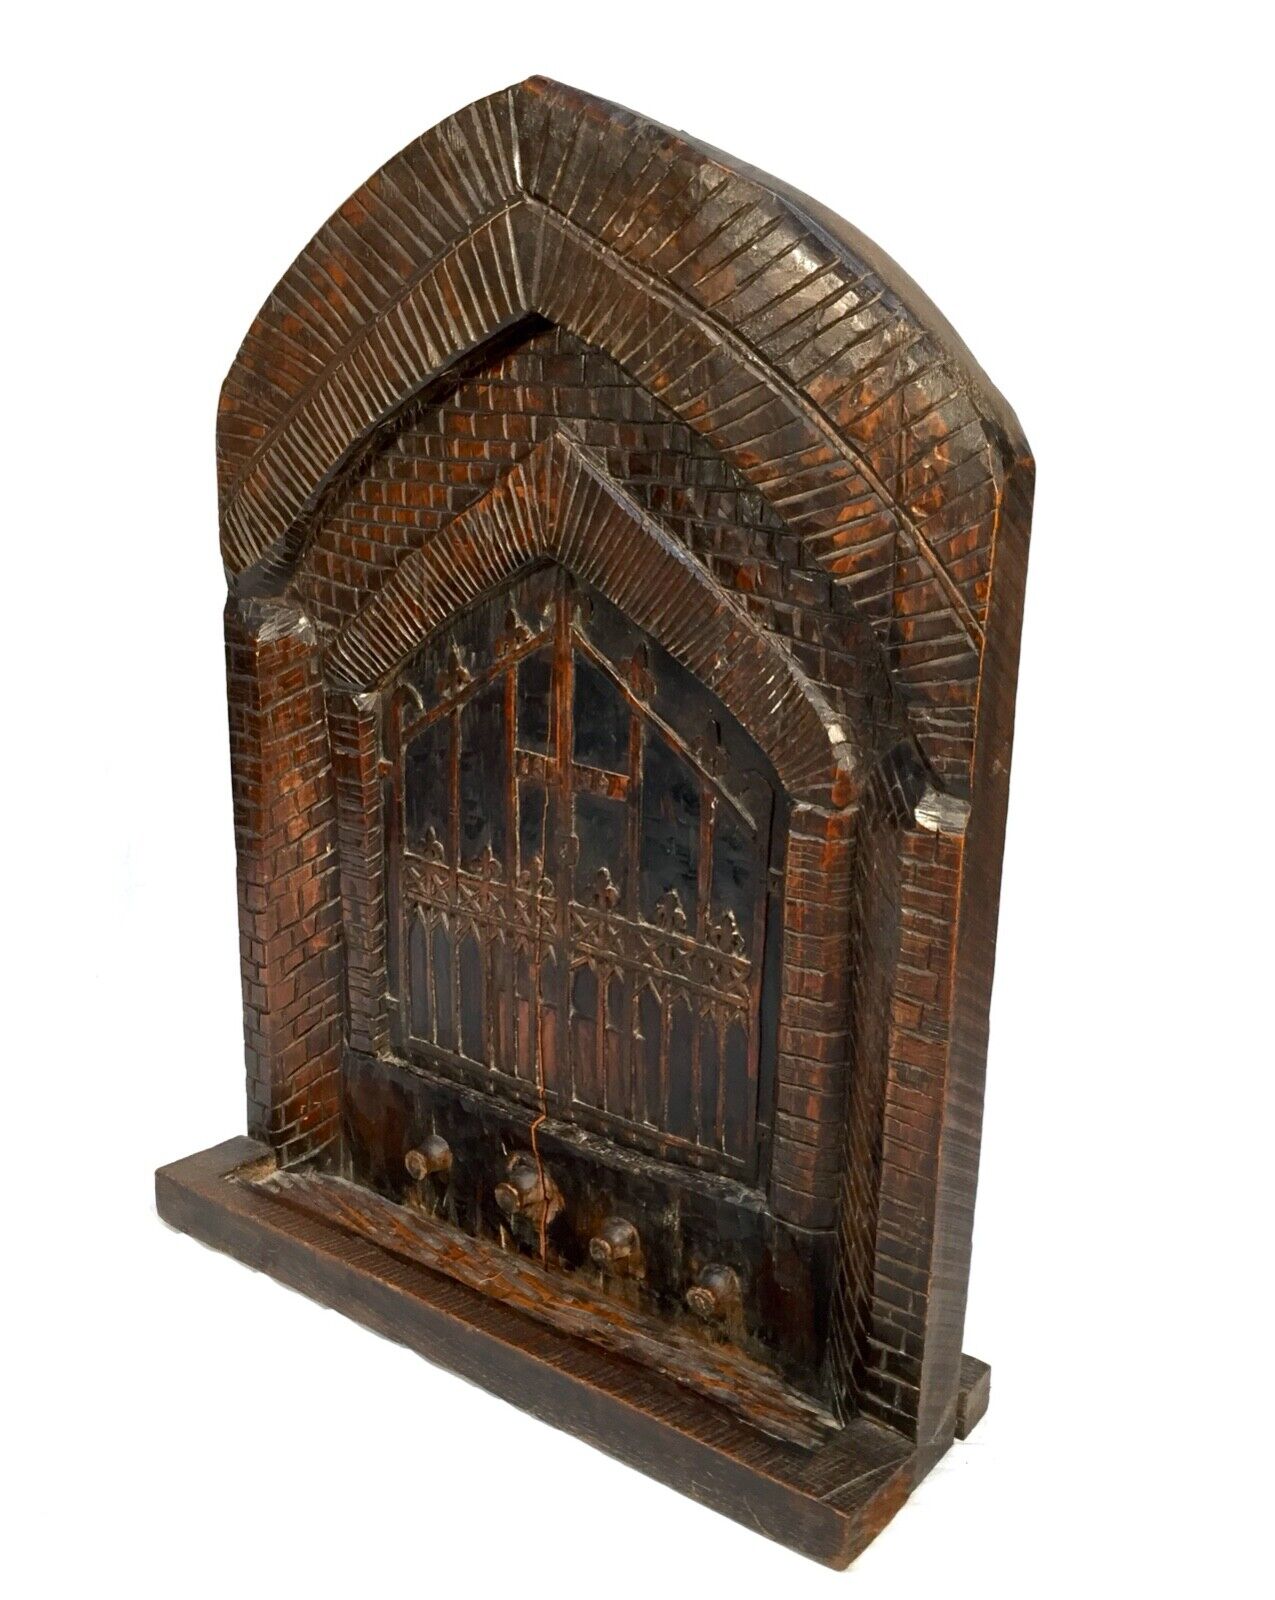 Antique Wooden Carved Fire Screen of Liskeard Pipe Well of St Martins c.1879